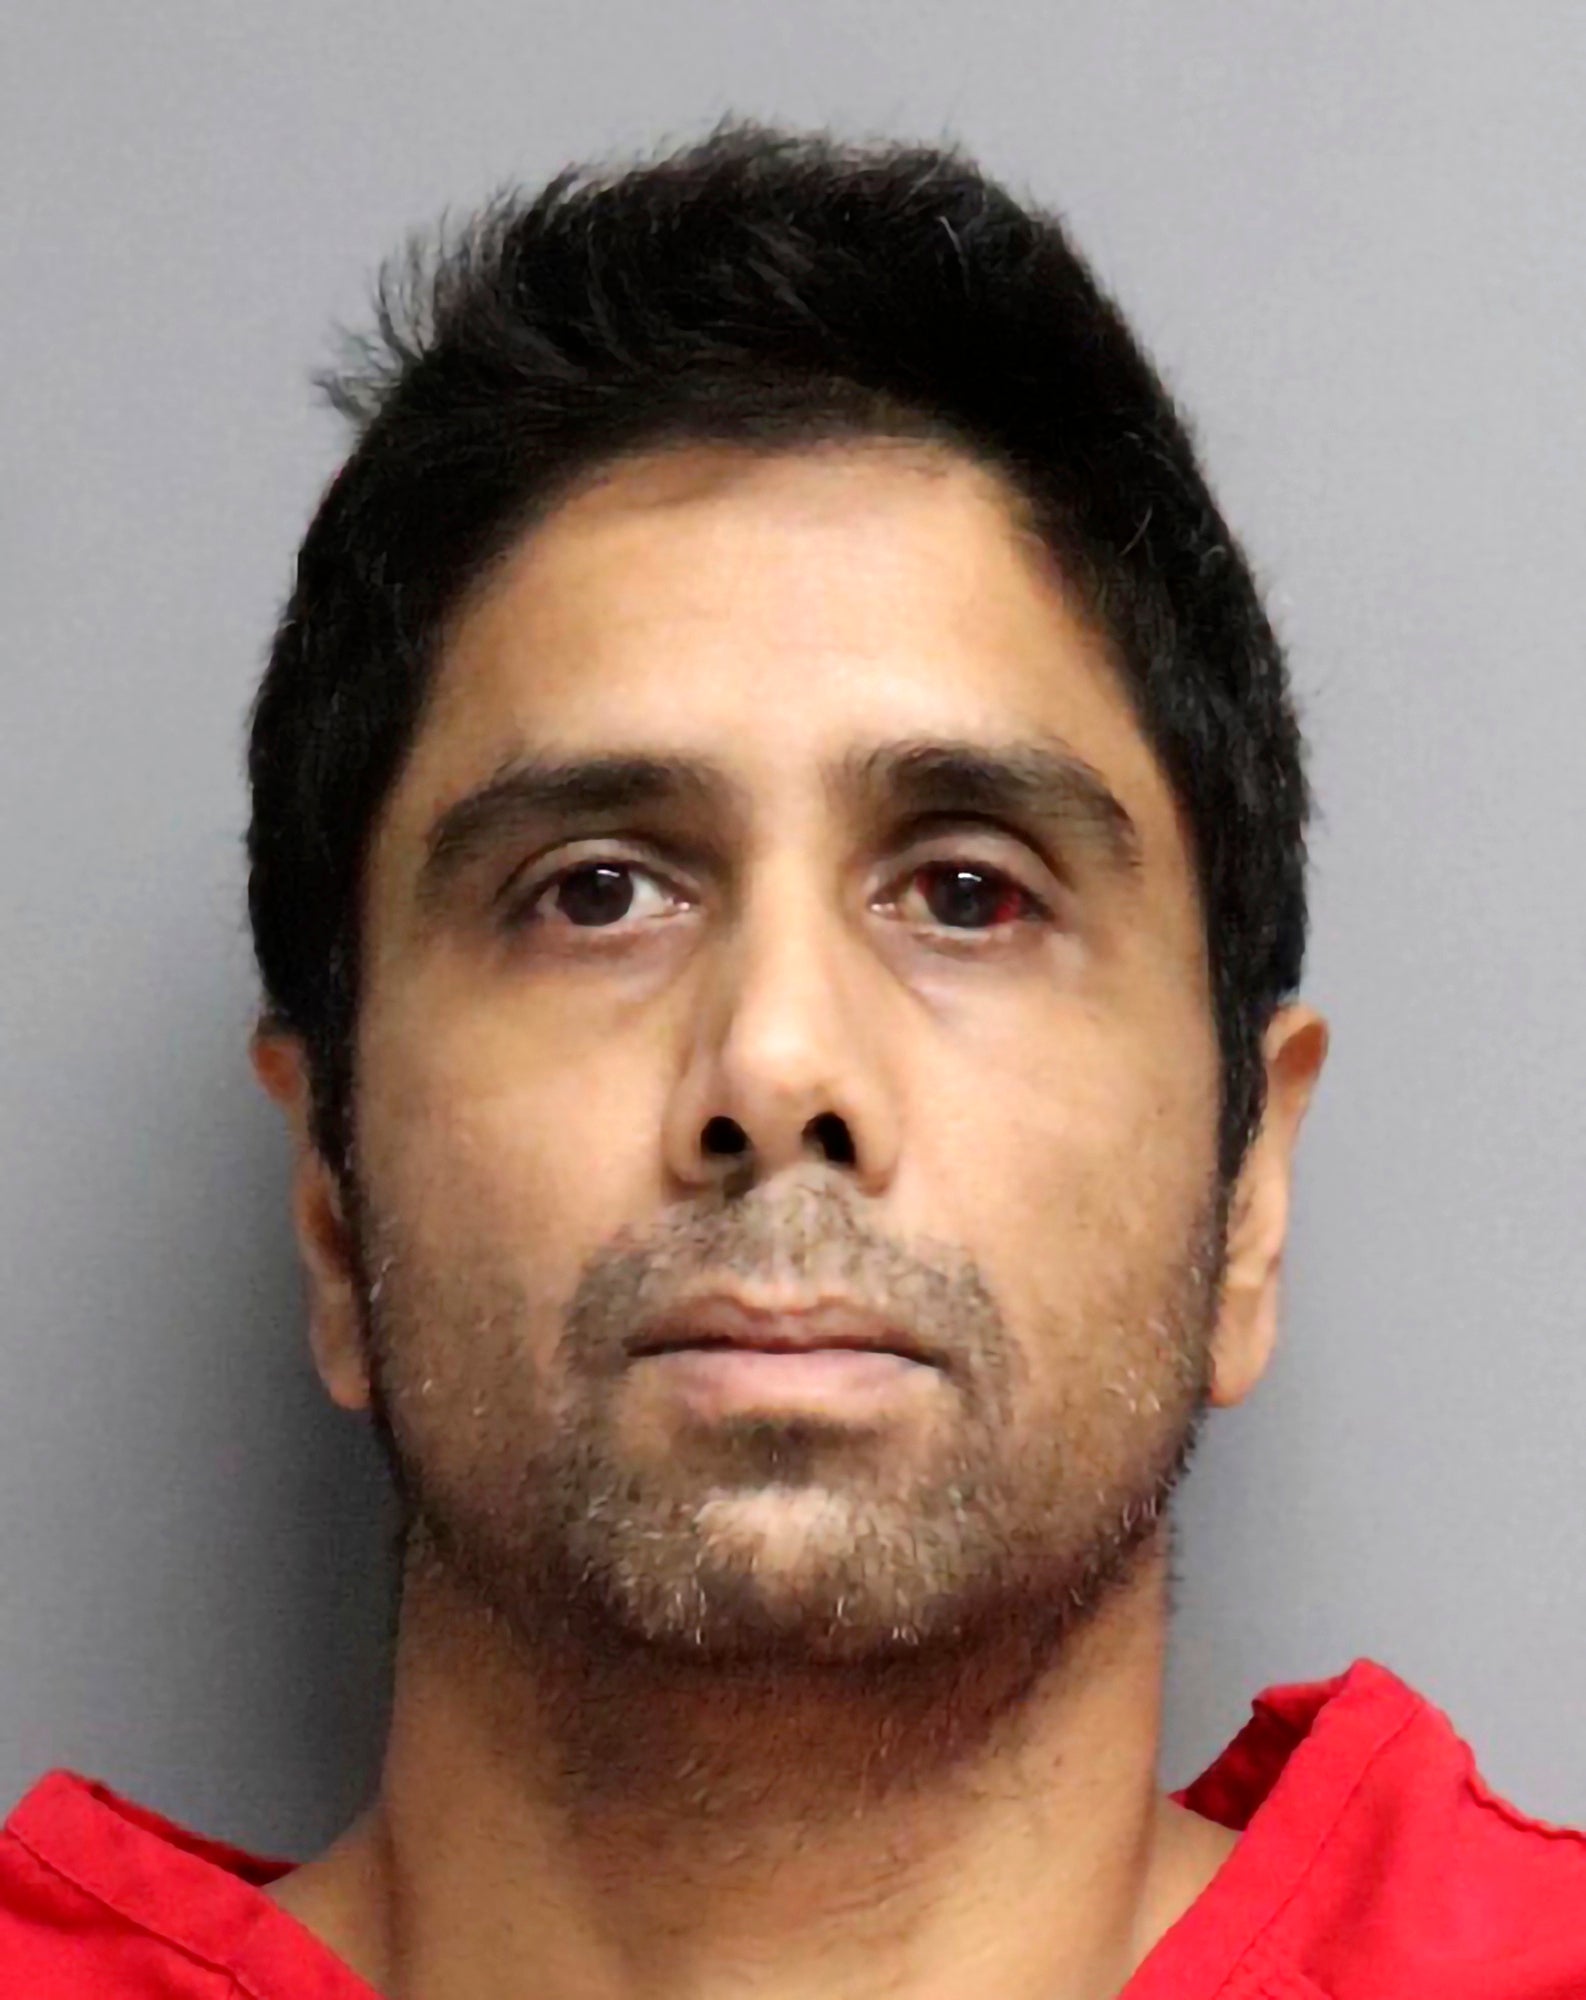 Dharmesh Patel, pictured last year, faces attempted murder charges after prosecutors say he drove his wife and two children off a cliff in California